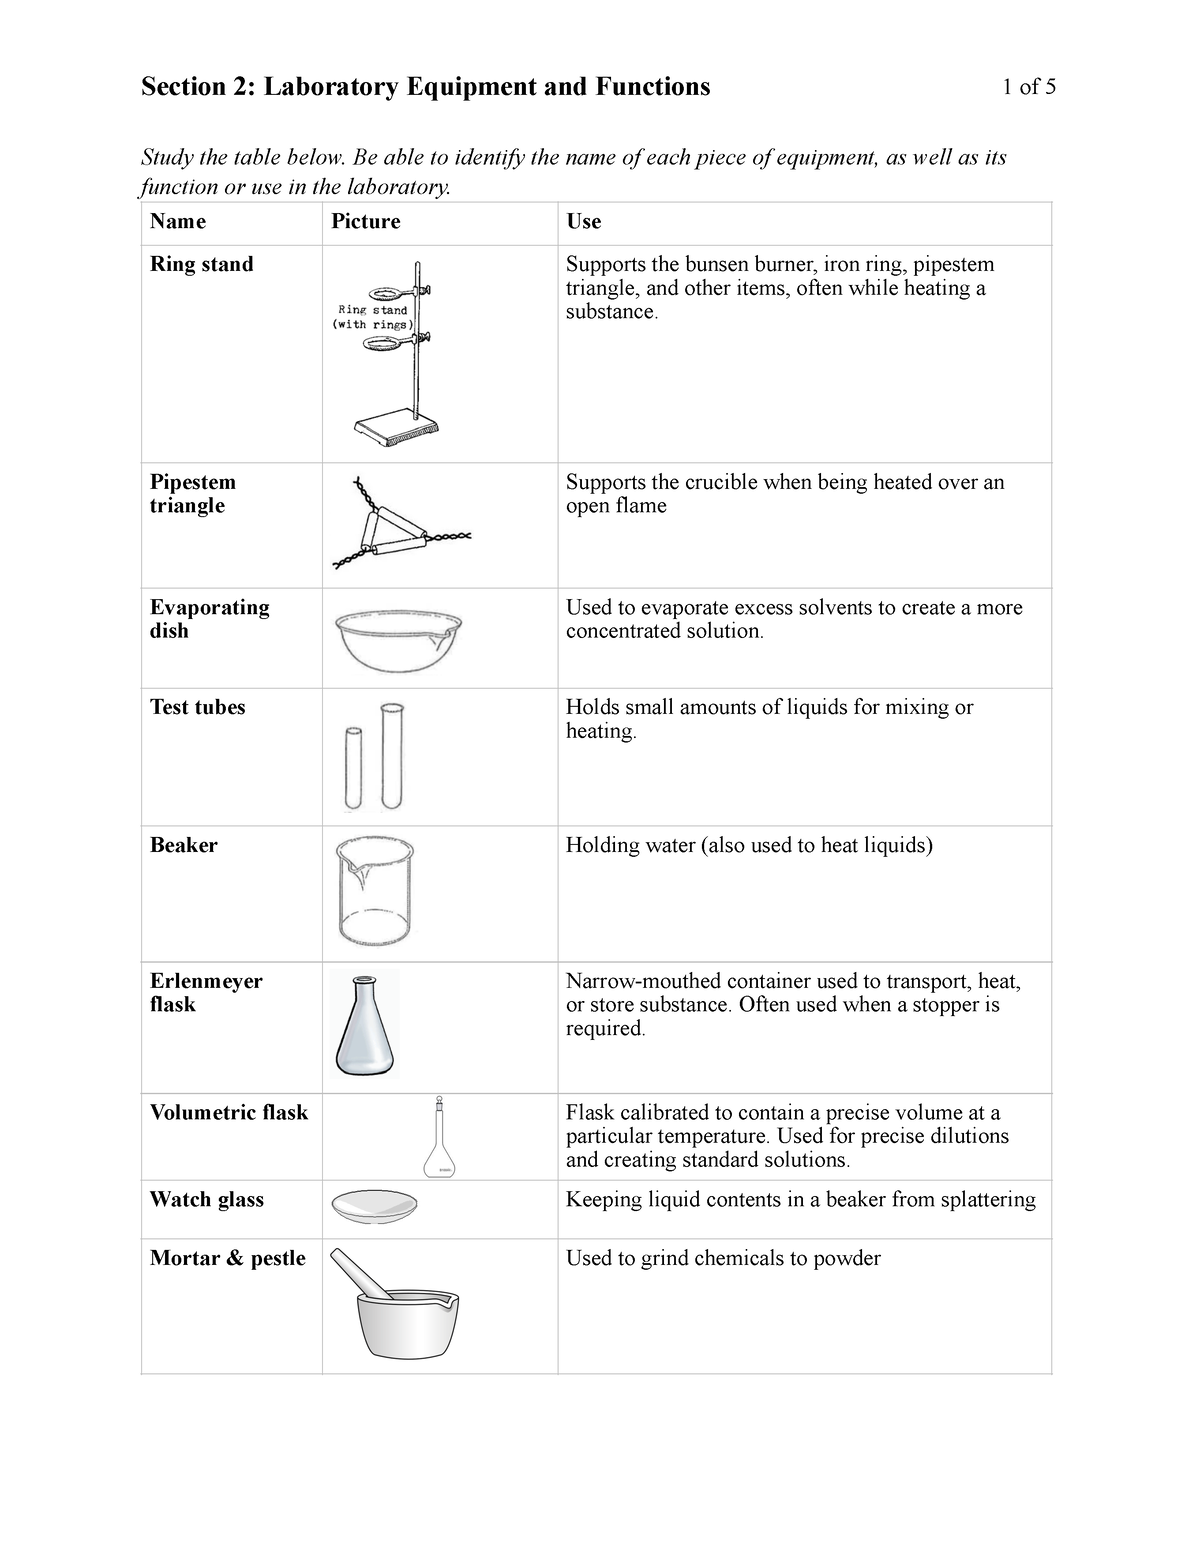 Laboratory Equipment and Functions Quiz - Study the table below. Be ...